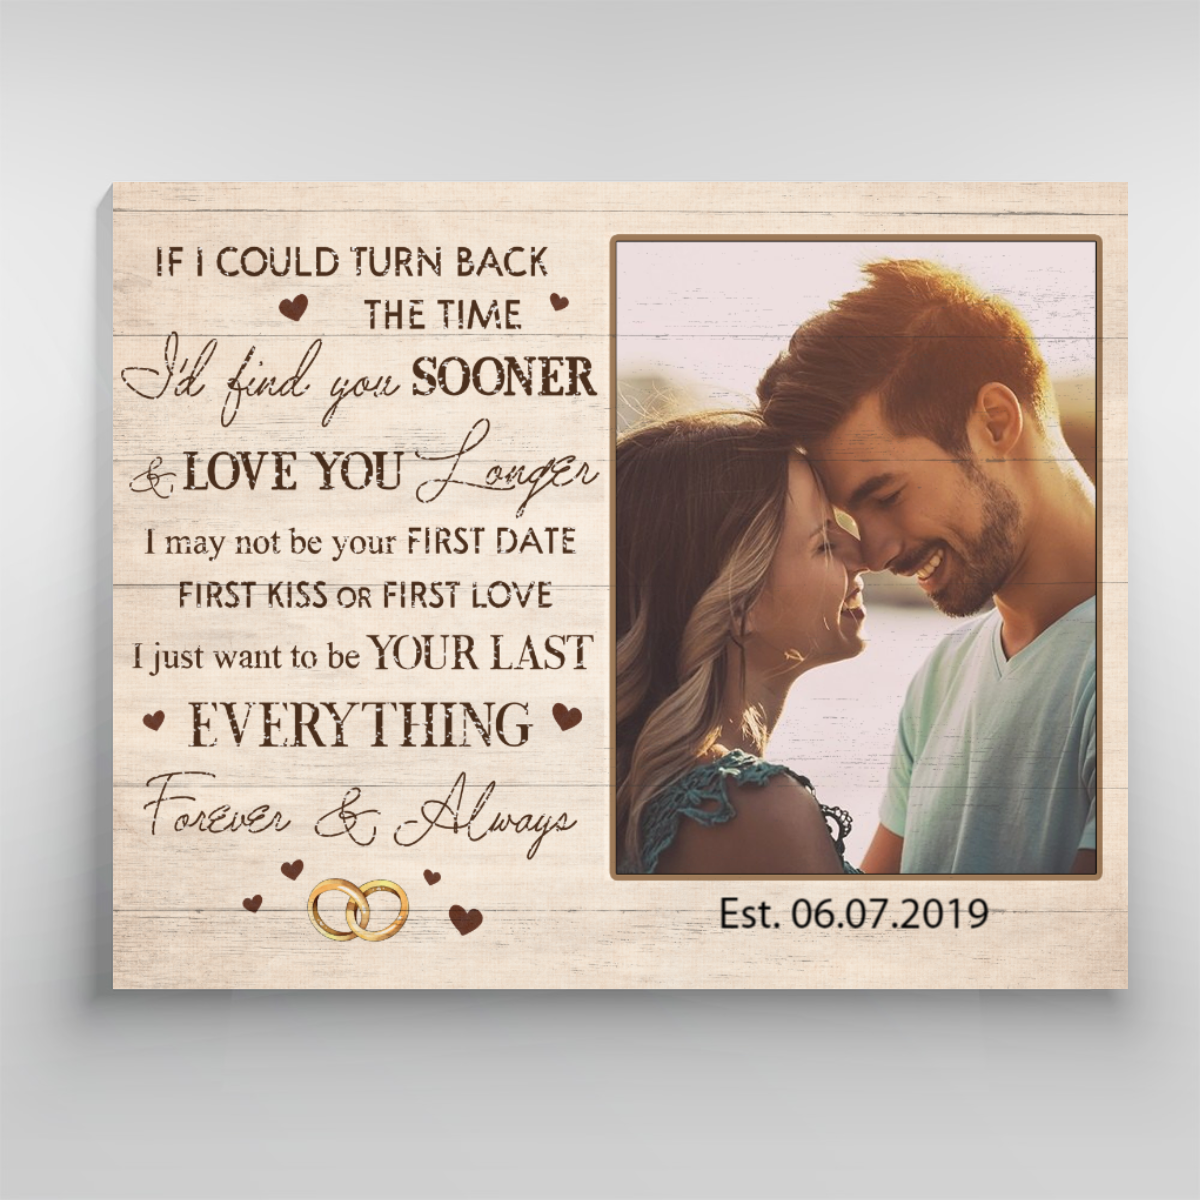 Personalized Custom Photo Poster Canvas - I Just Want to be your last Everything - Gifts For Him, Gifts For Her - Anniversary Gifts, Valentine's Day Gifts - Poster Canvas